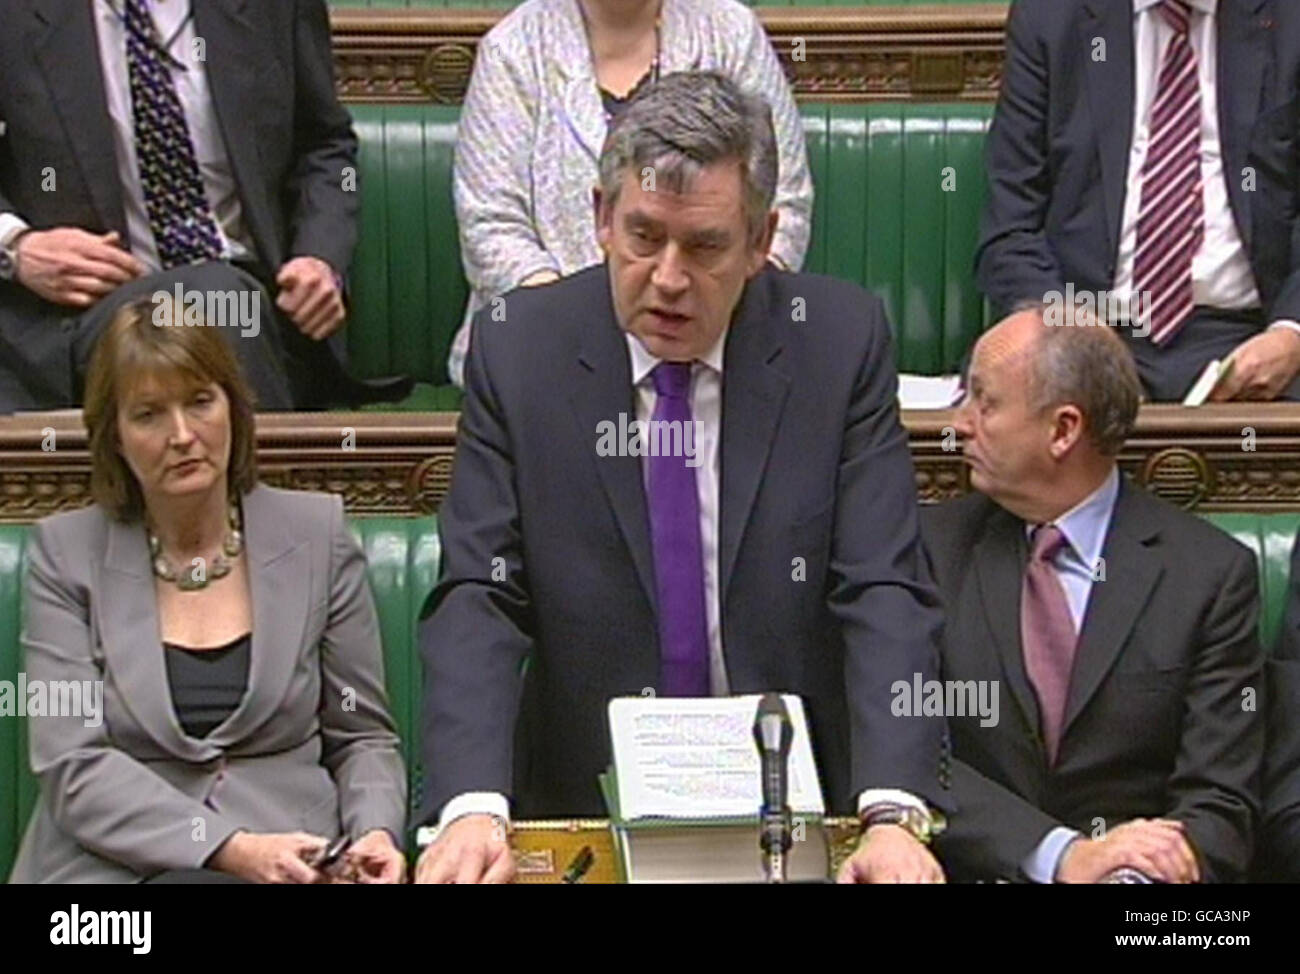 Prime Minister Gordon Brown gives a statement to the House of Commons, London, where he said that the last loyalist paramilitary organisation to hold arms, the South-East Antrim UDA, had this afternoon 'completed their decommissioning'. Stock Photo